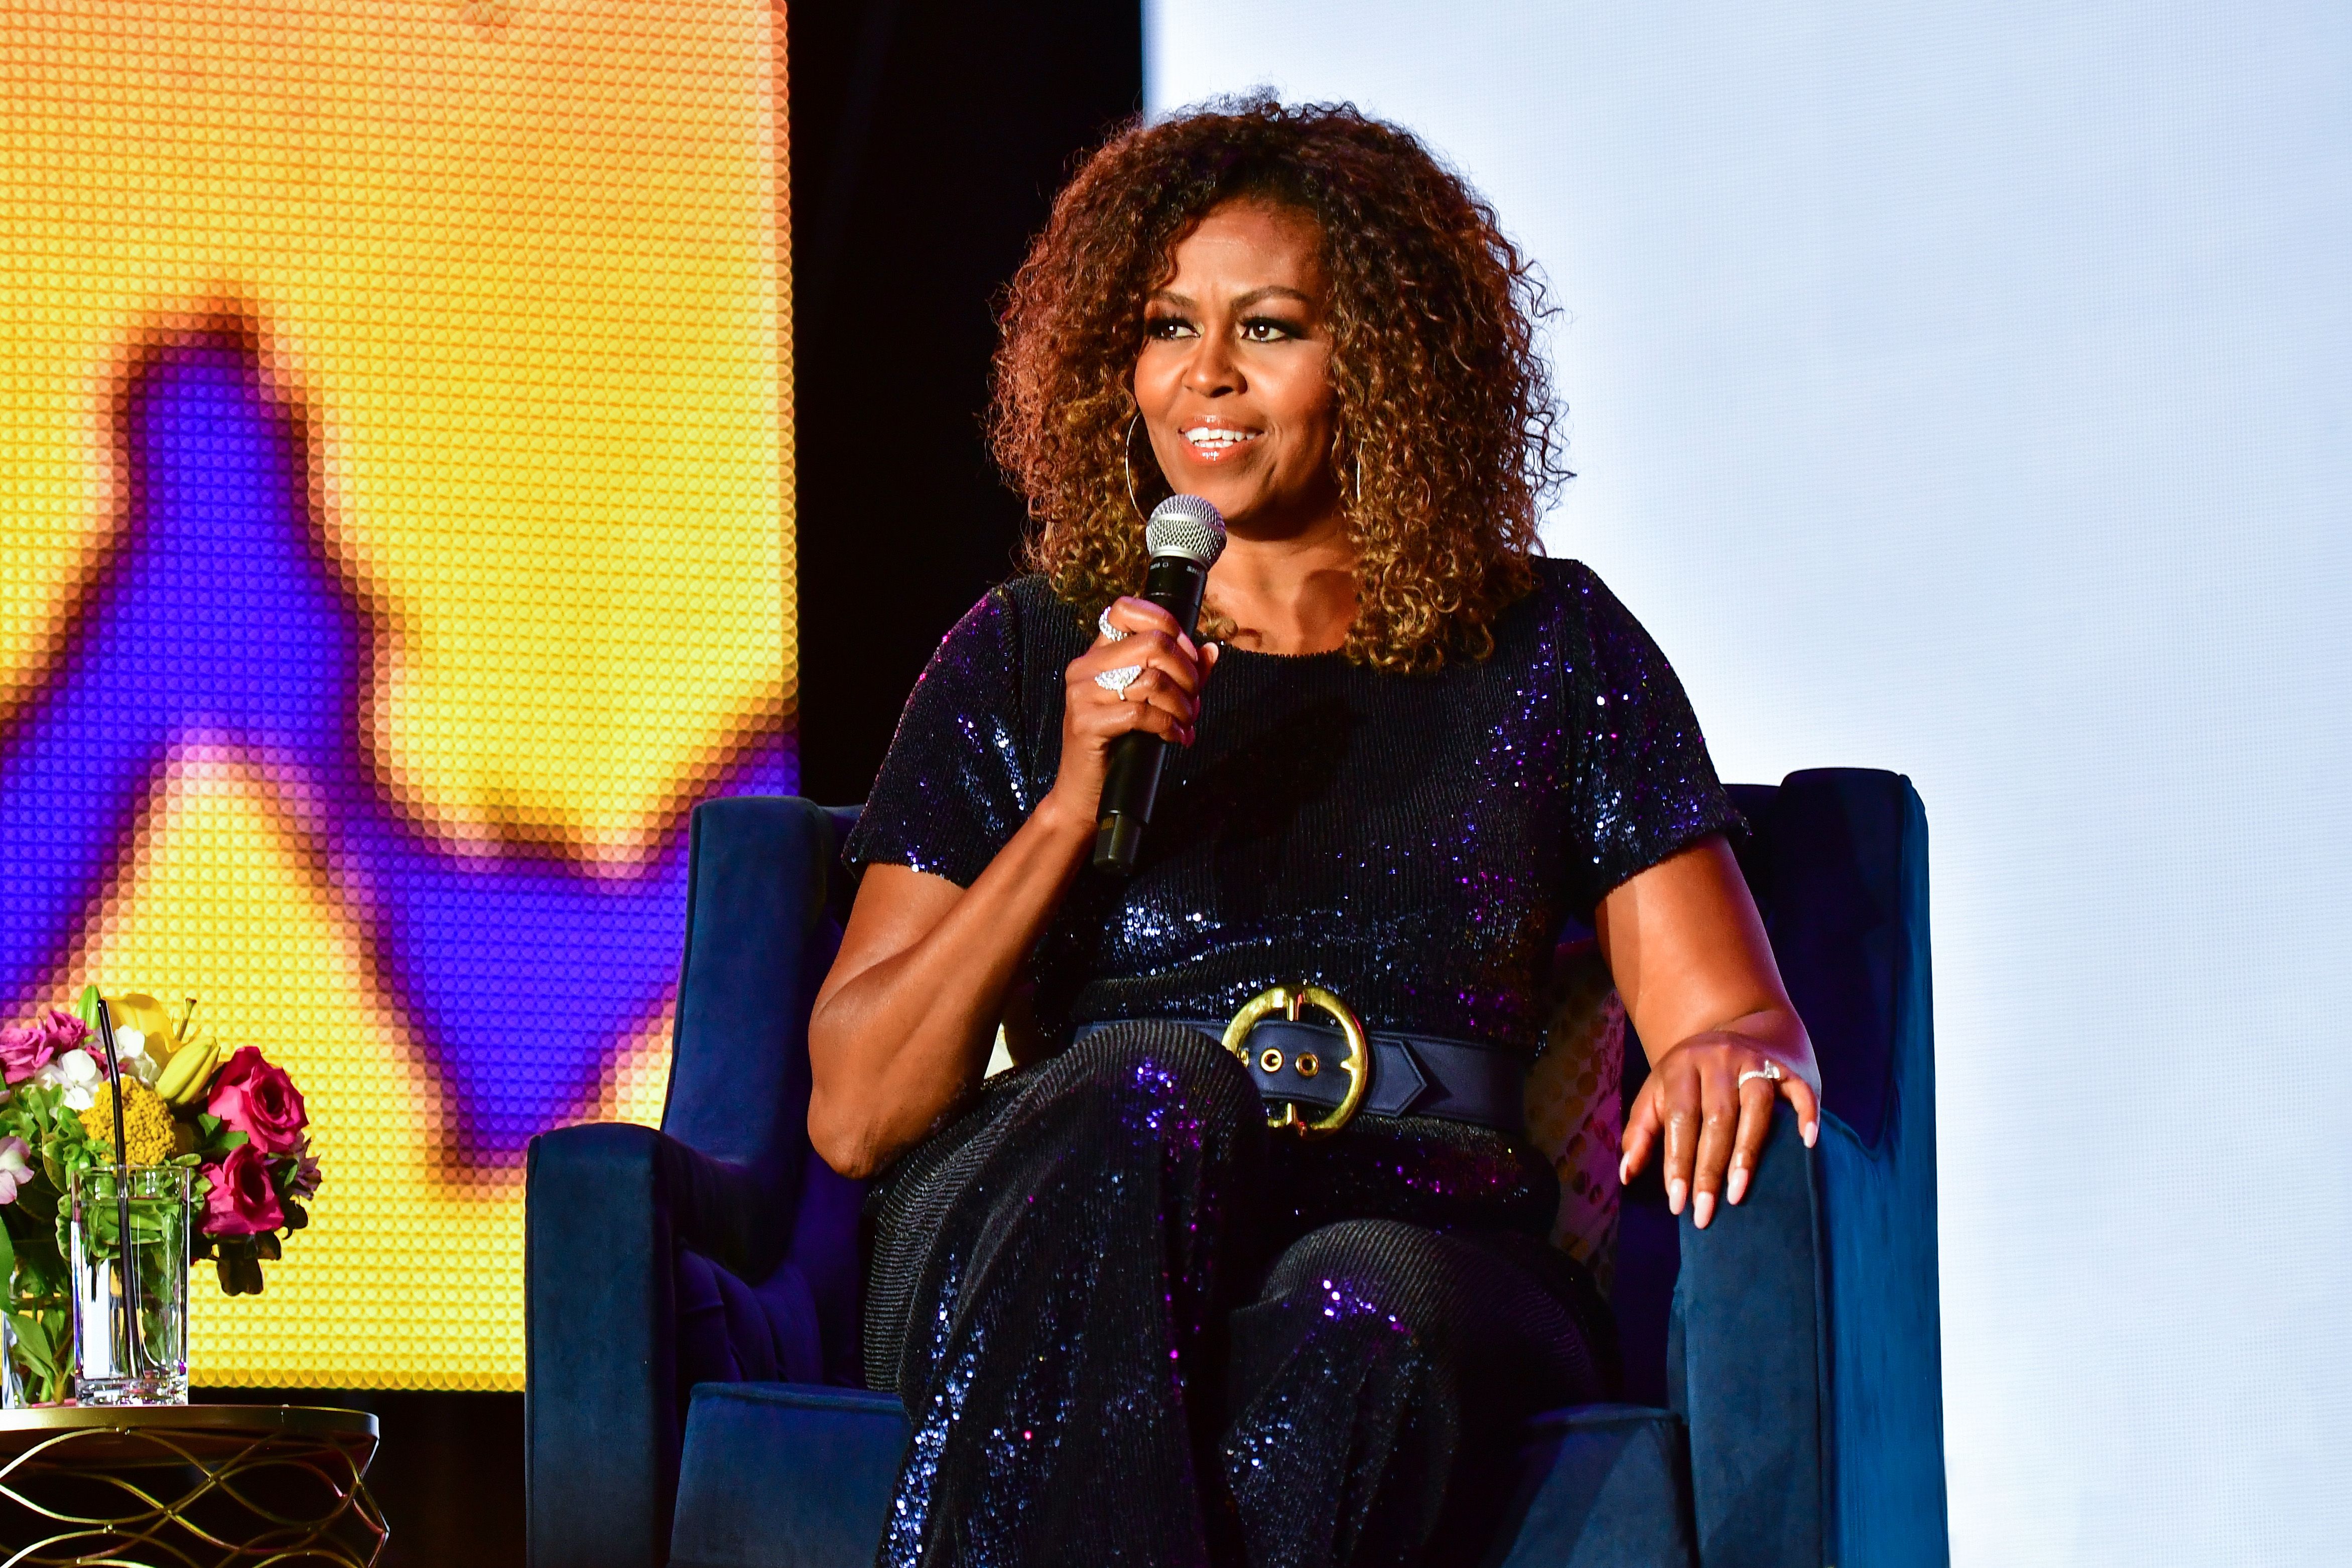  Michelle Obama on stage at the 2019 ESSENCE Festival at the Mercedes-Benz Superdome on July 06, 2019 | Getty Images 